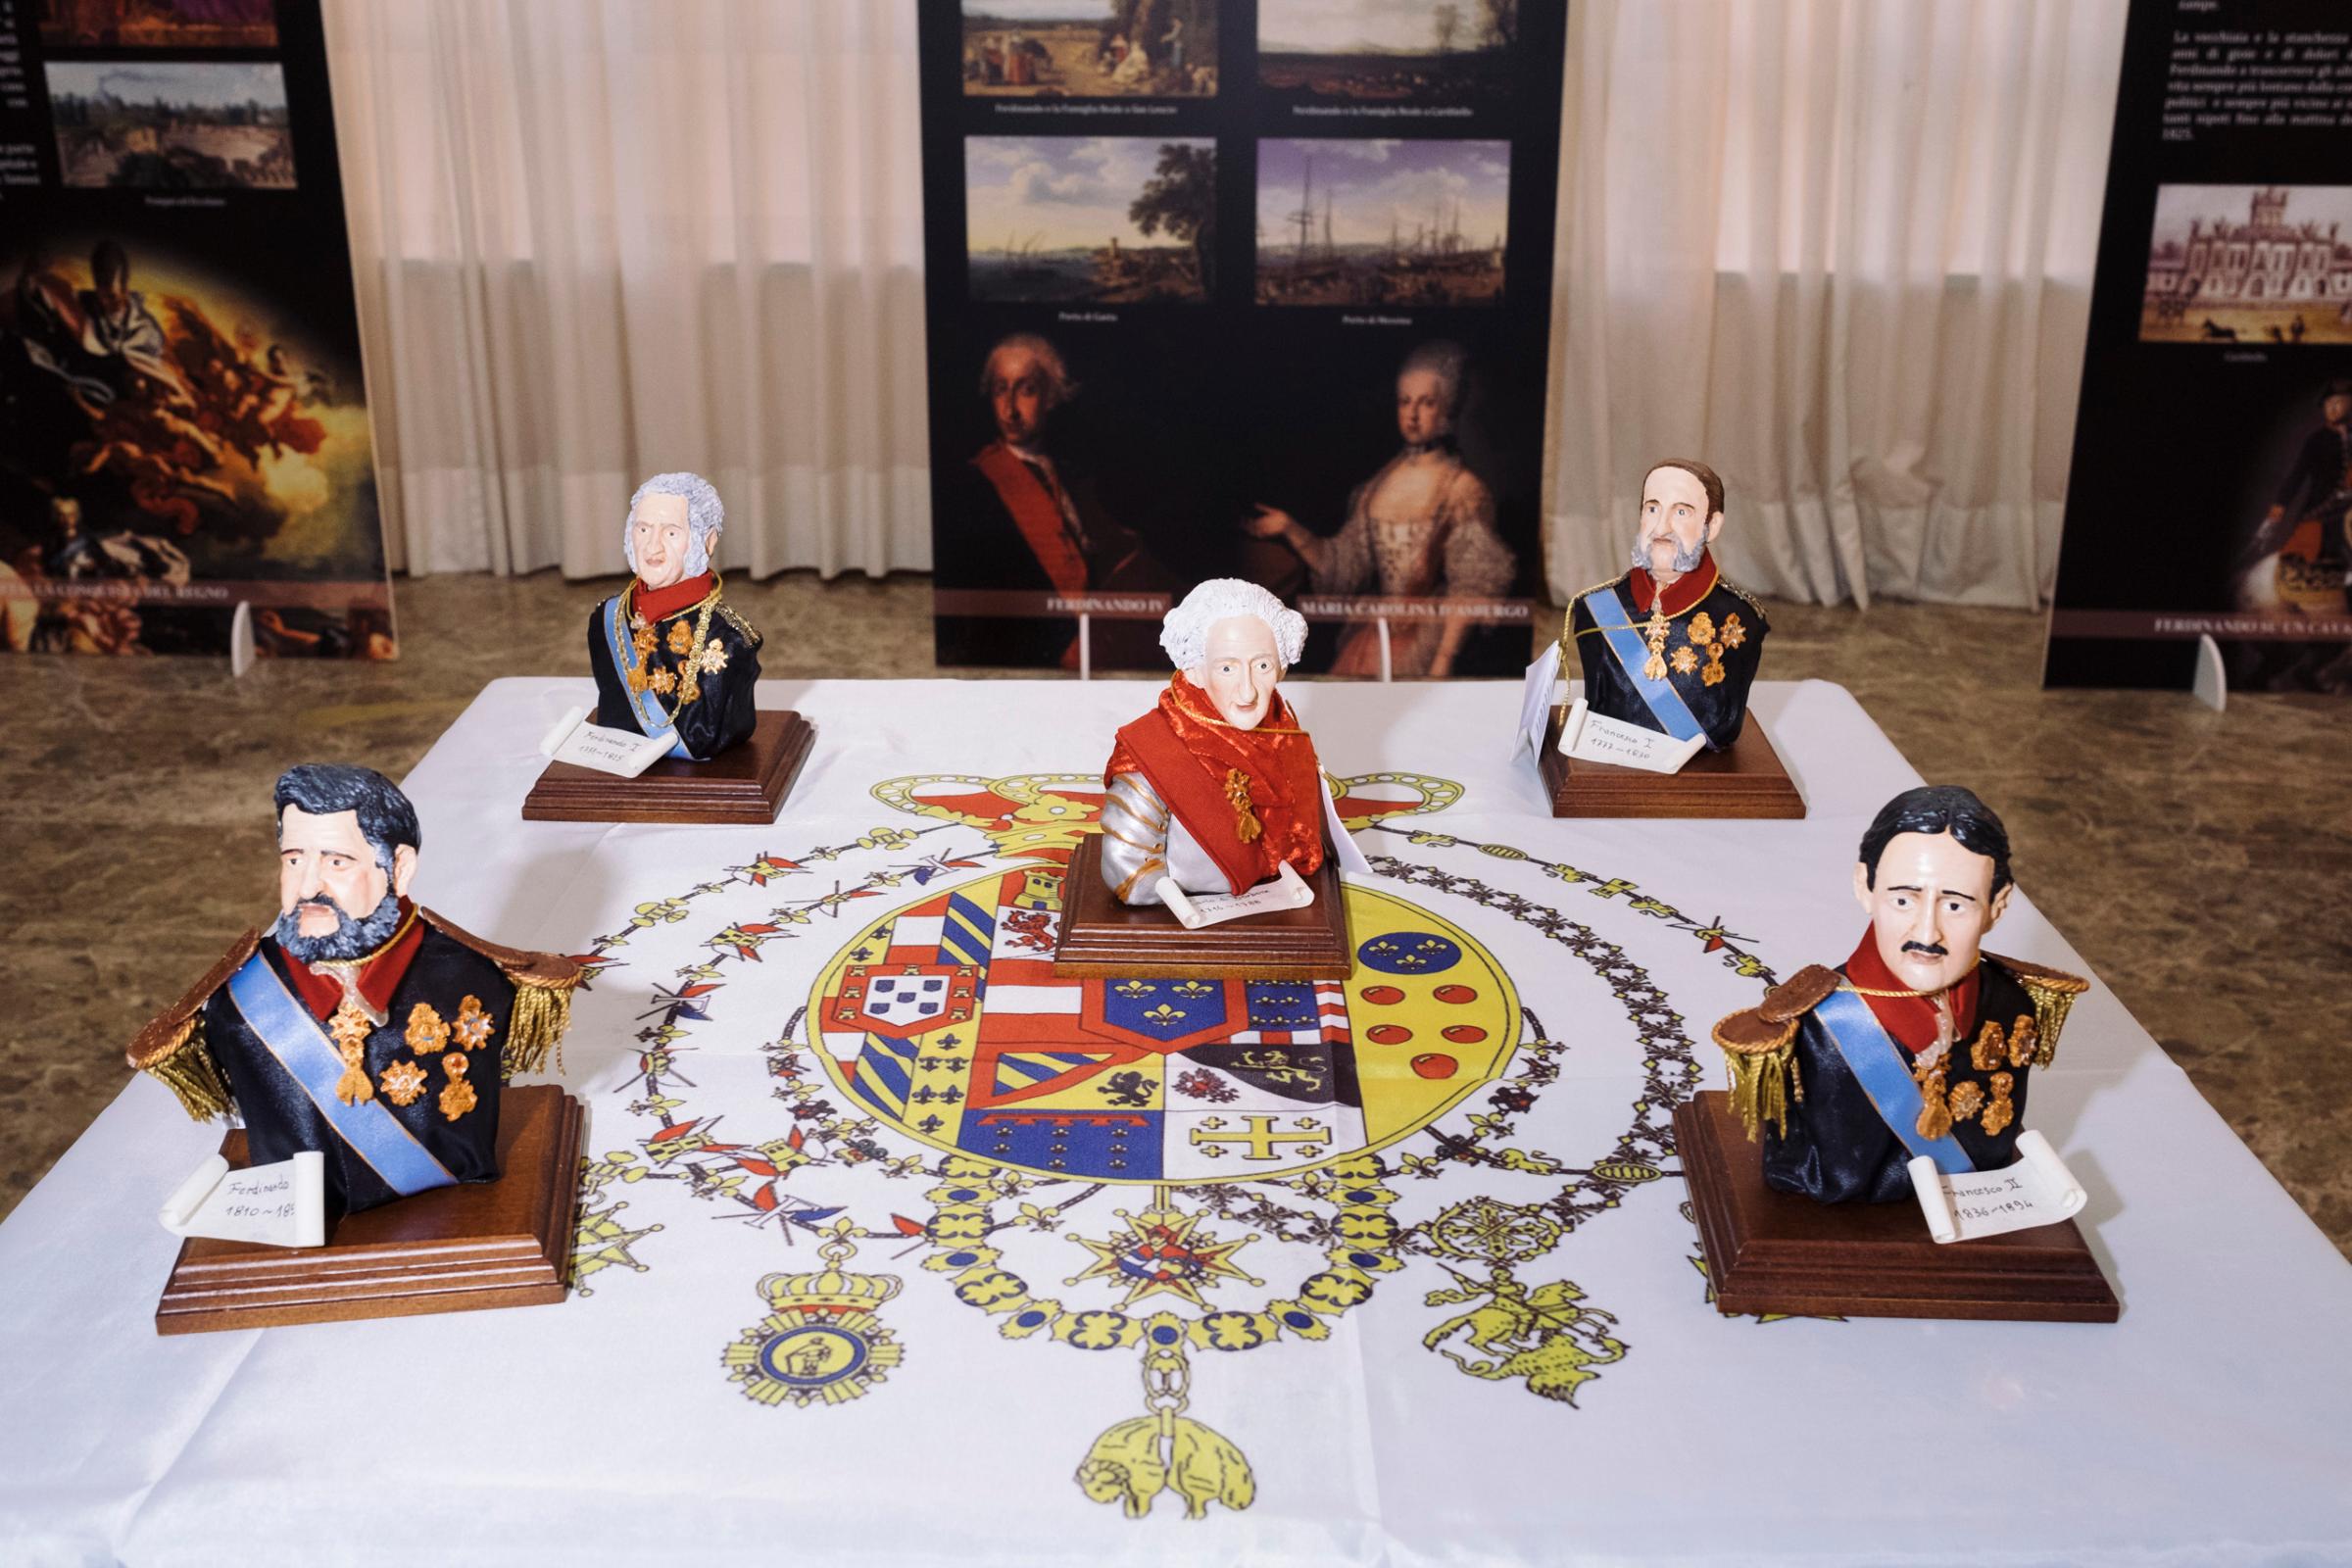 Little statues portraying the five Bourbon kings that have been on the throne of the Kingdom of the Two Sicilies, February, 2016. From the left to right: Ferdinand II, Ferdinand I, Charles, Francis I and Francis II.